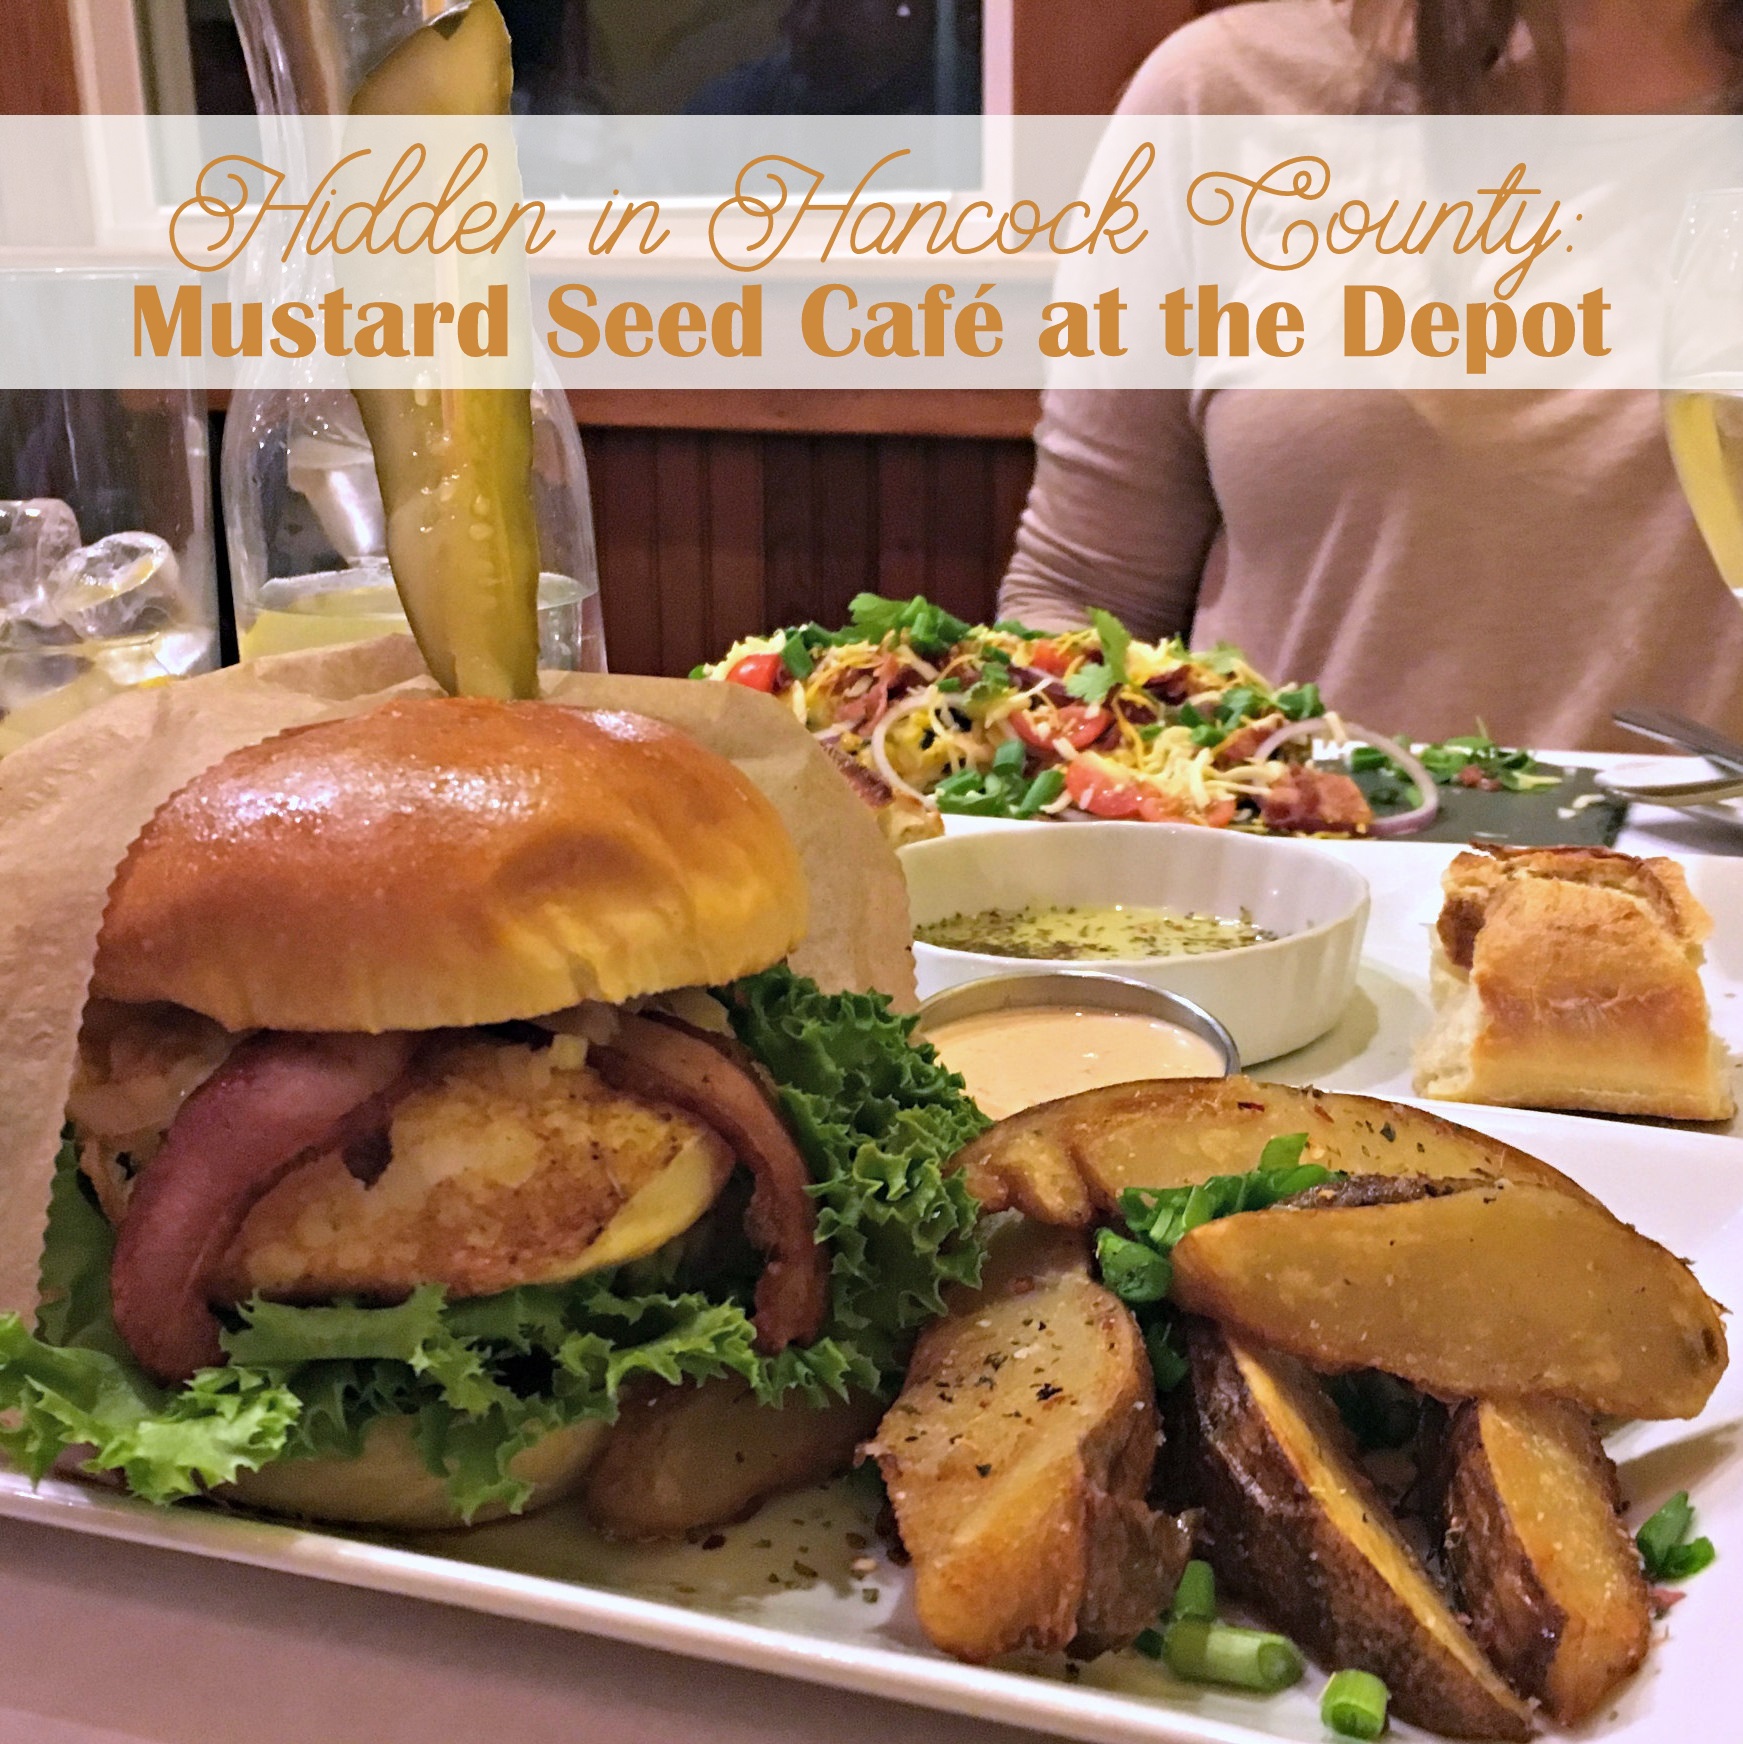 Looking for a great restaurant in Hancock County!  Check out this hidden gem in Bluffton, Ohio - Mustard Seed Cafe at the Depot!  •  VisitFindlay.com